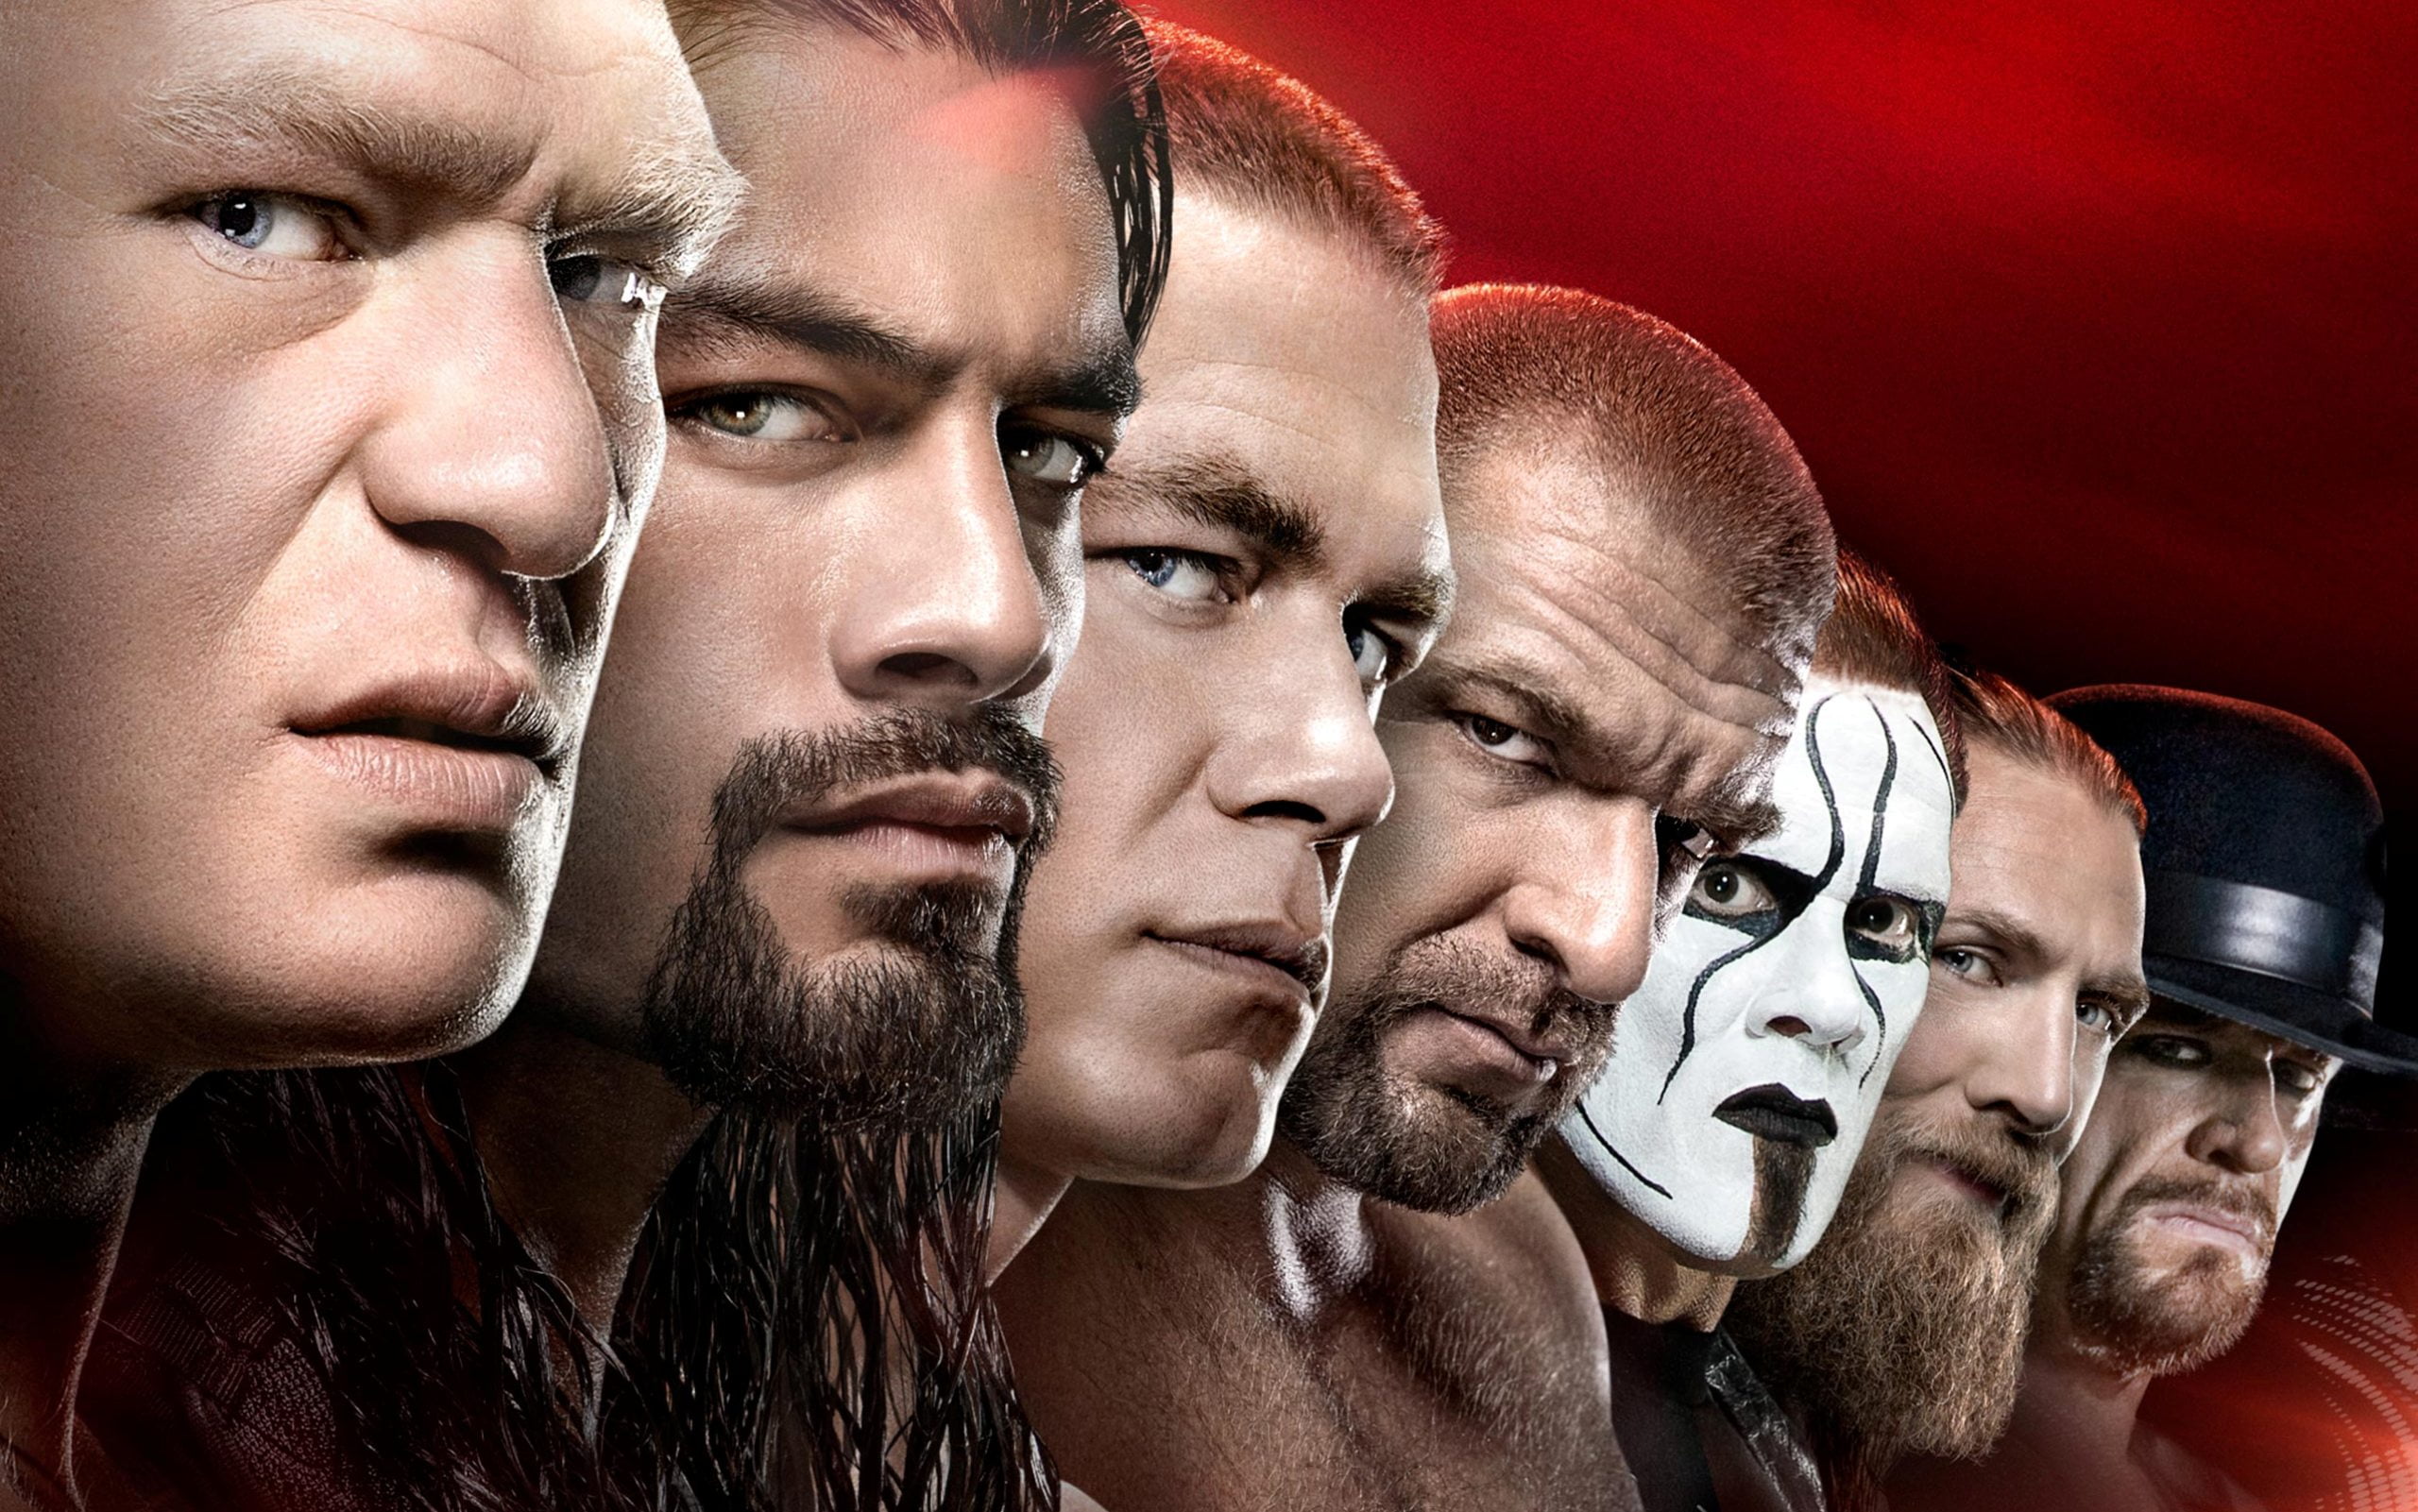 WWE WrestleMania, Roman Reigns, Triple H, and The Undertaker